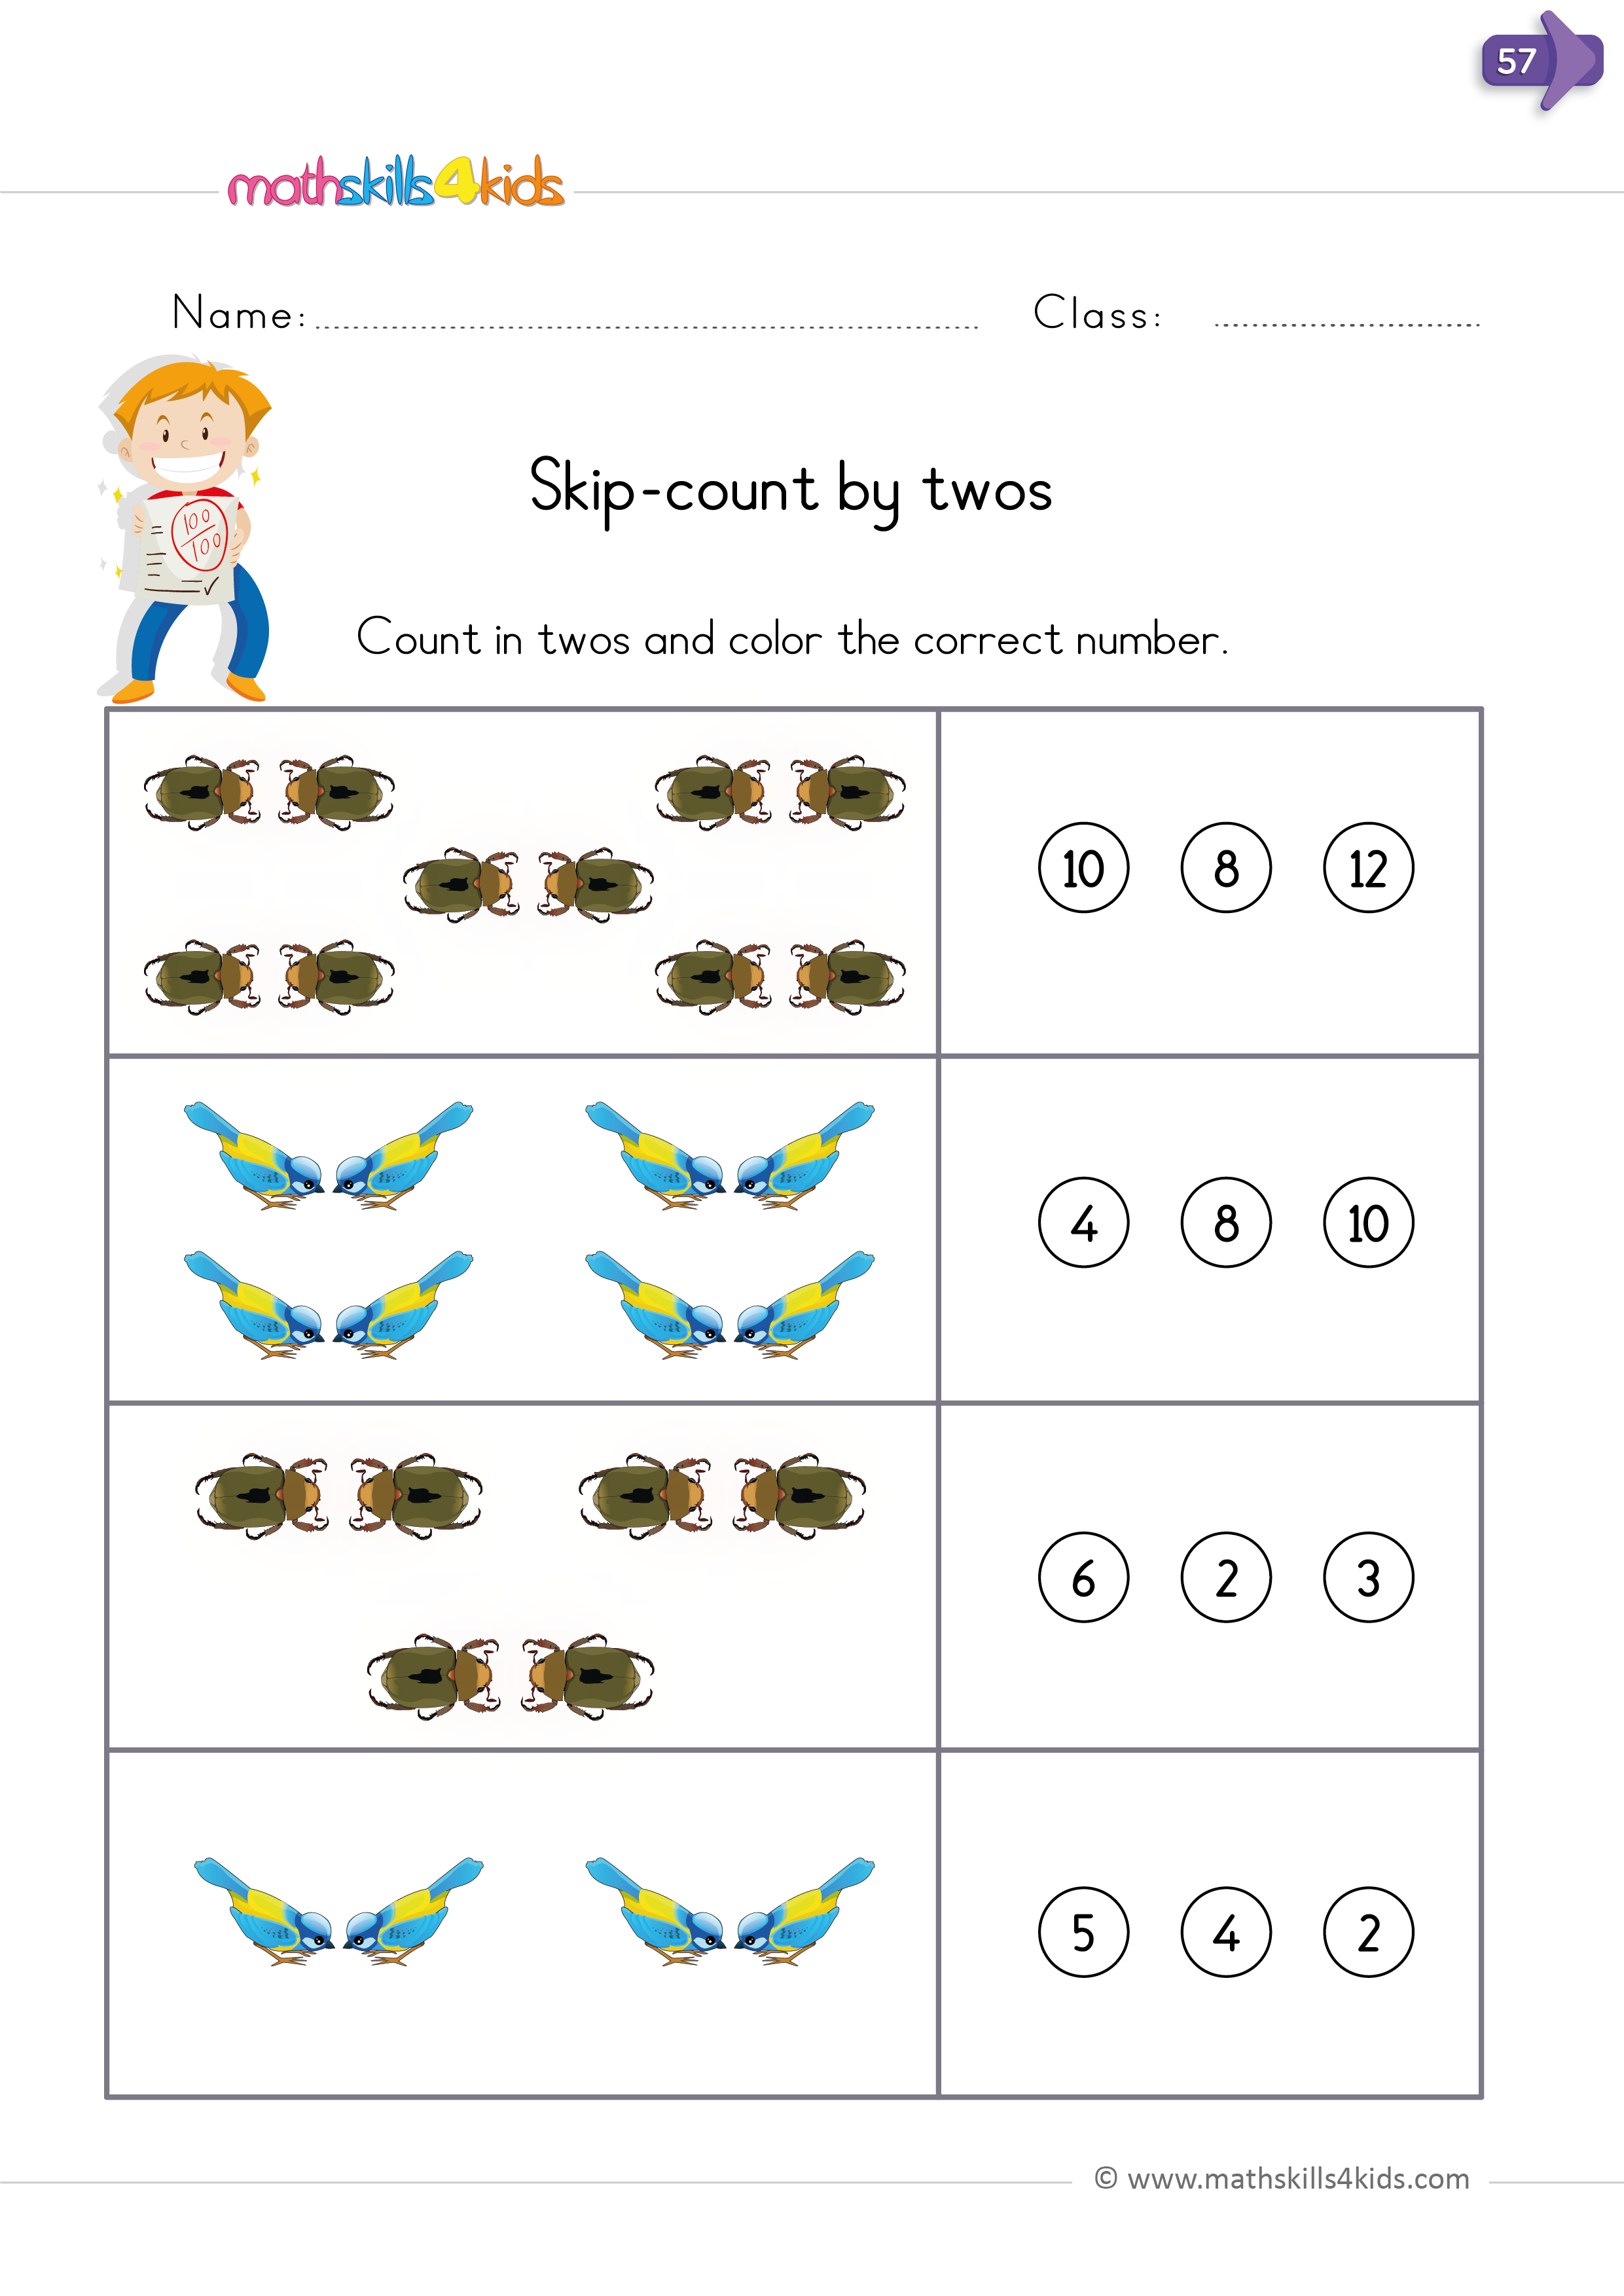 Skip counting worksheets for kindergarten - practice and learn Counting by 2's